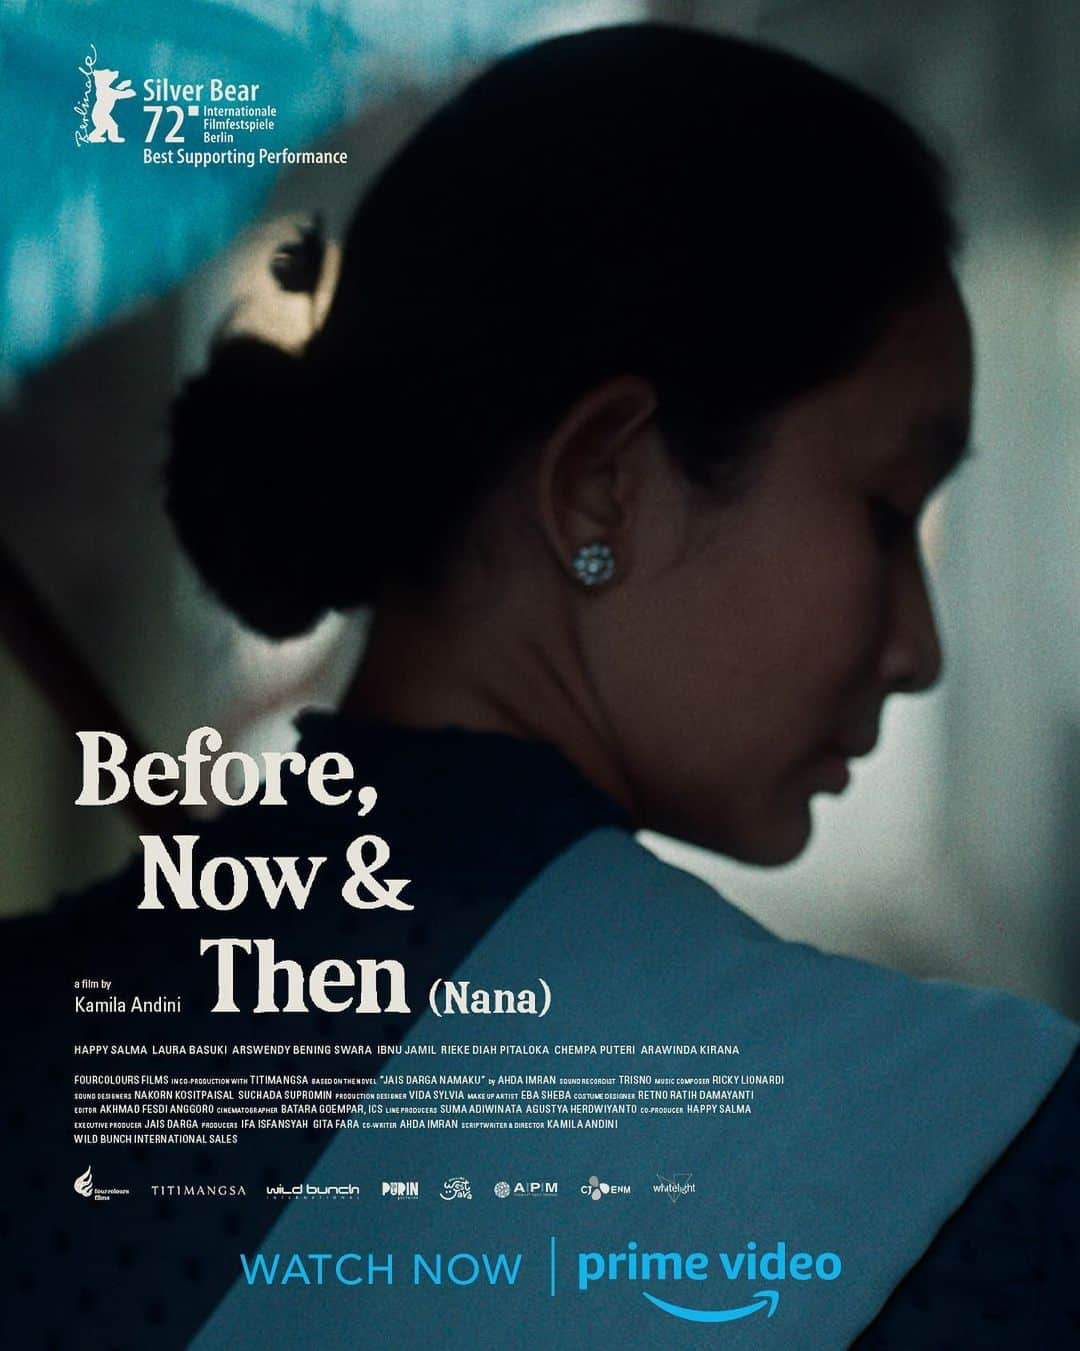  Before, Now & Then (Nana) - Sinopsis, Pemain, OST, Review